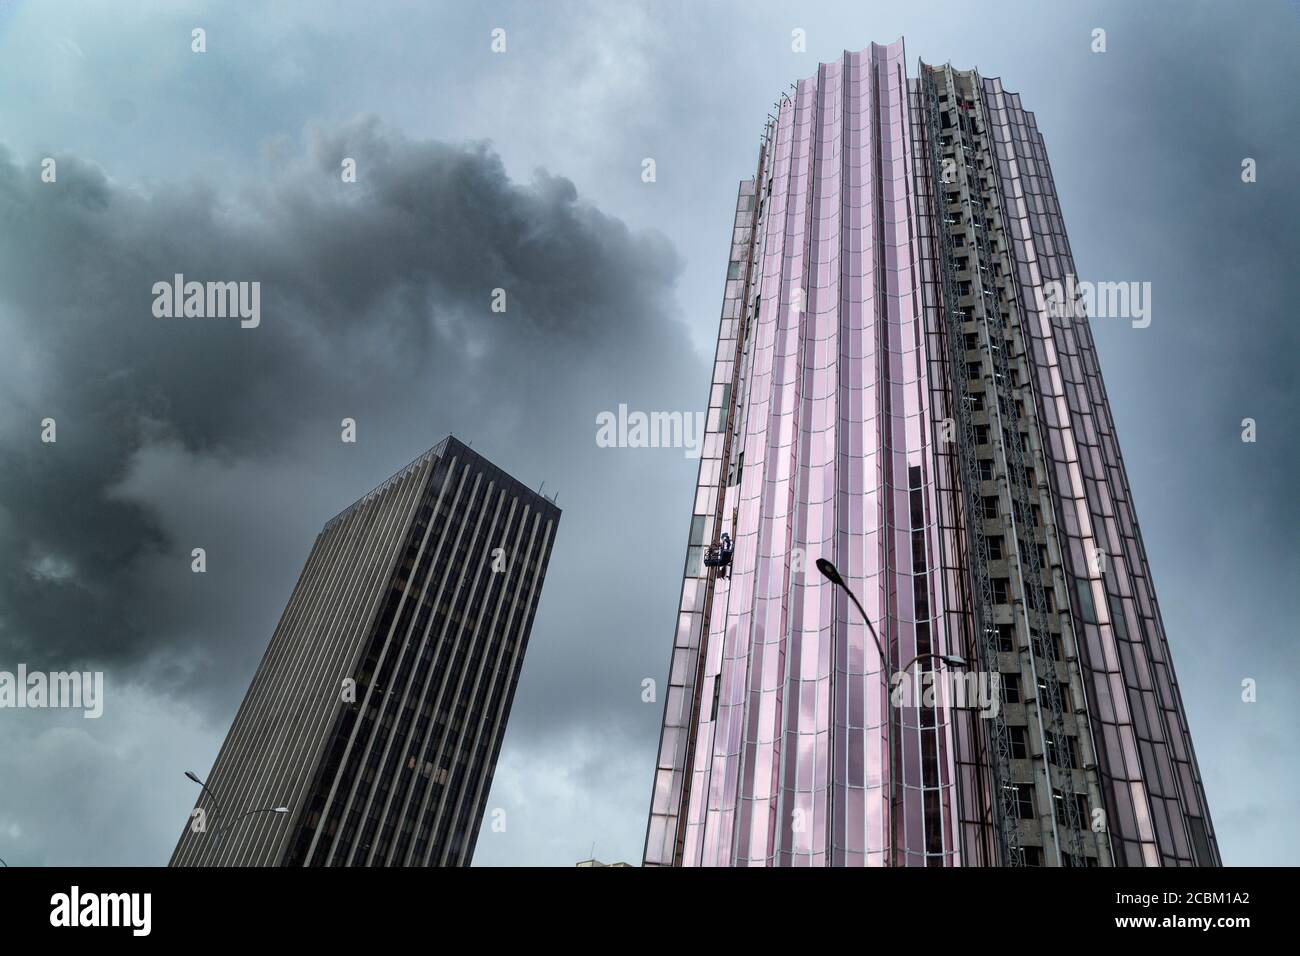 Low angle view of two skyscrapers, Abidjan, Ivory Coast, Africa Stock Photo